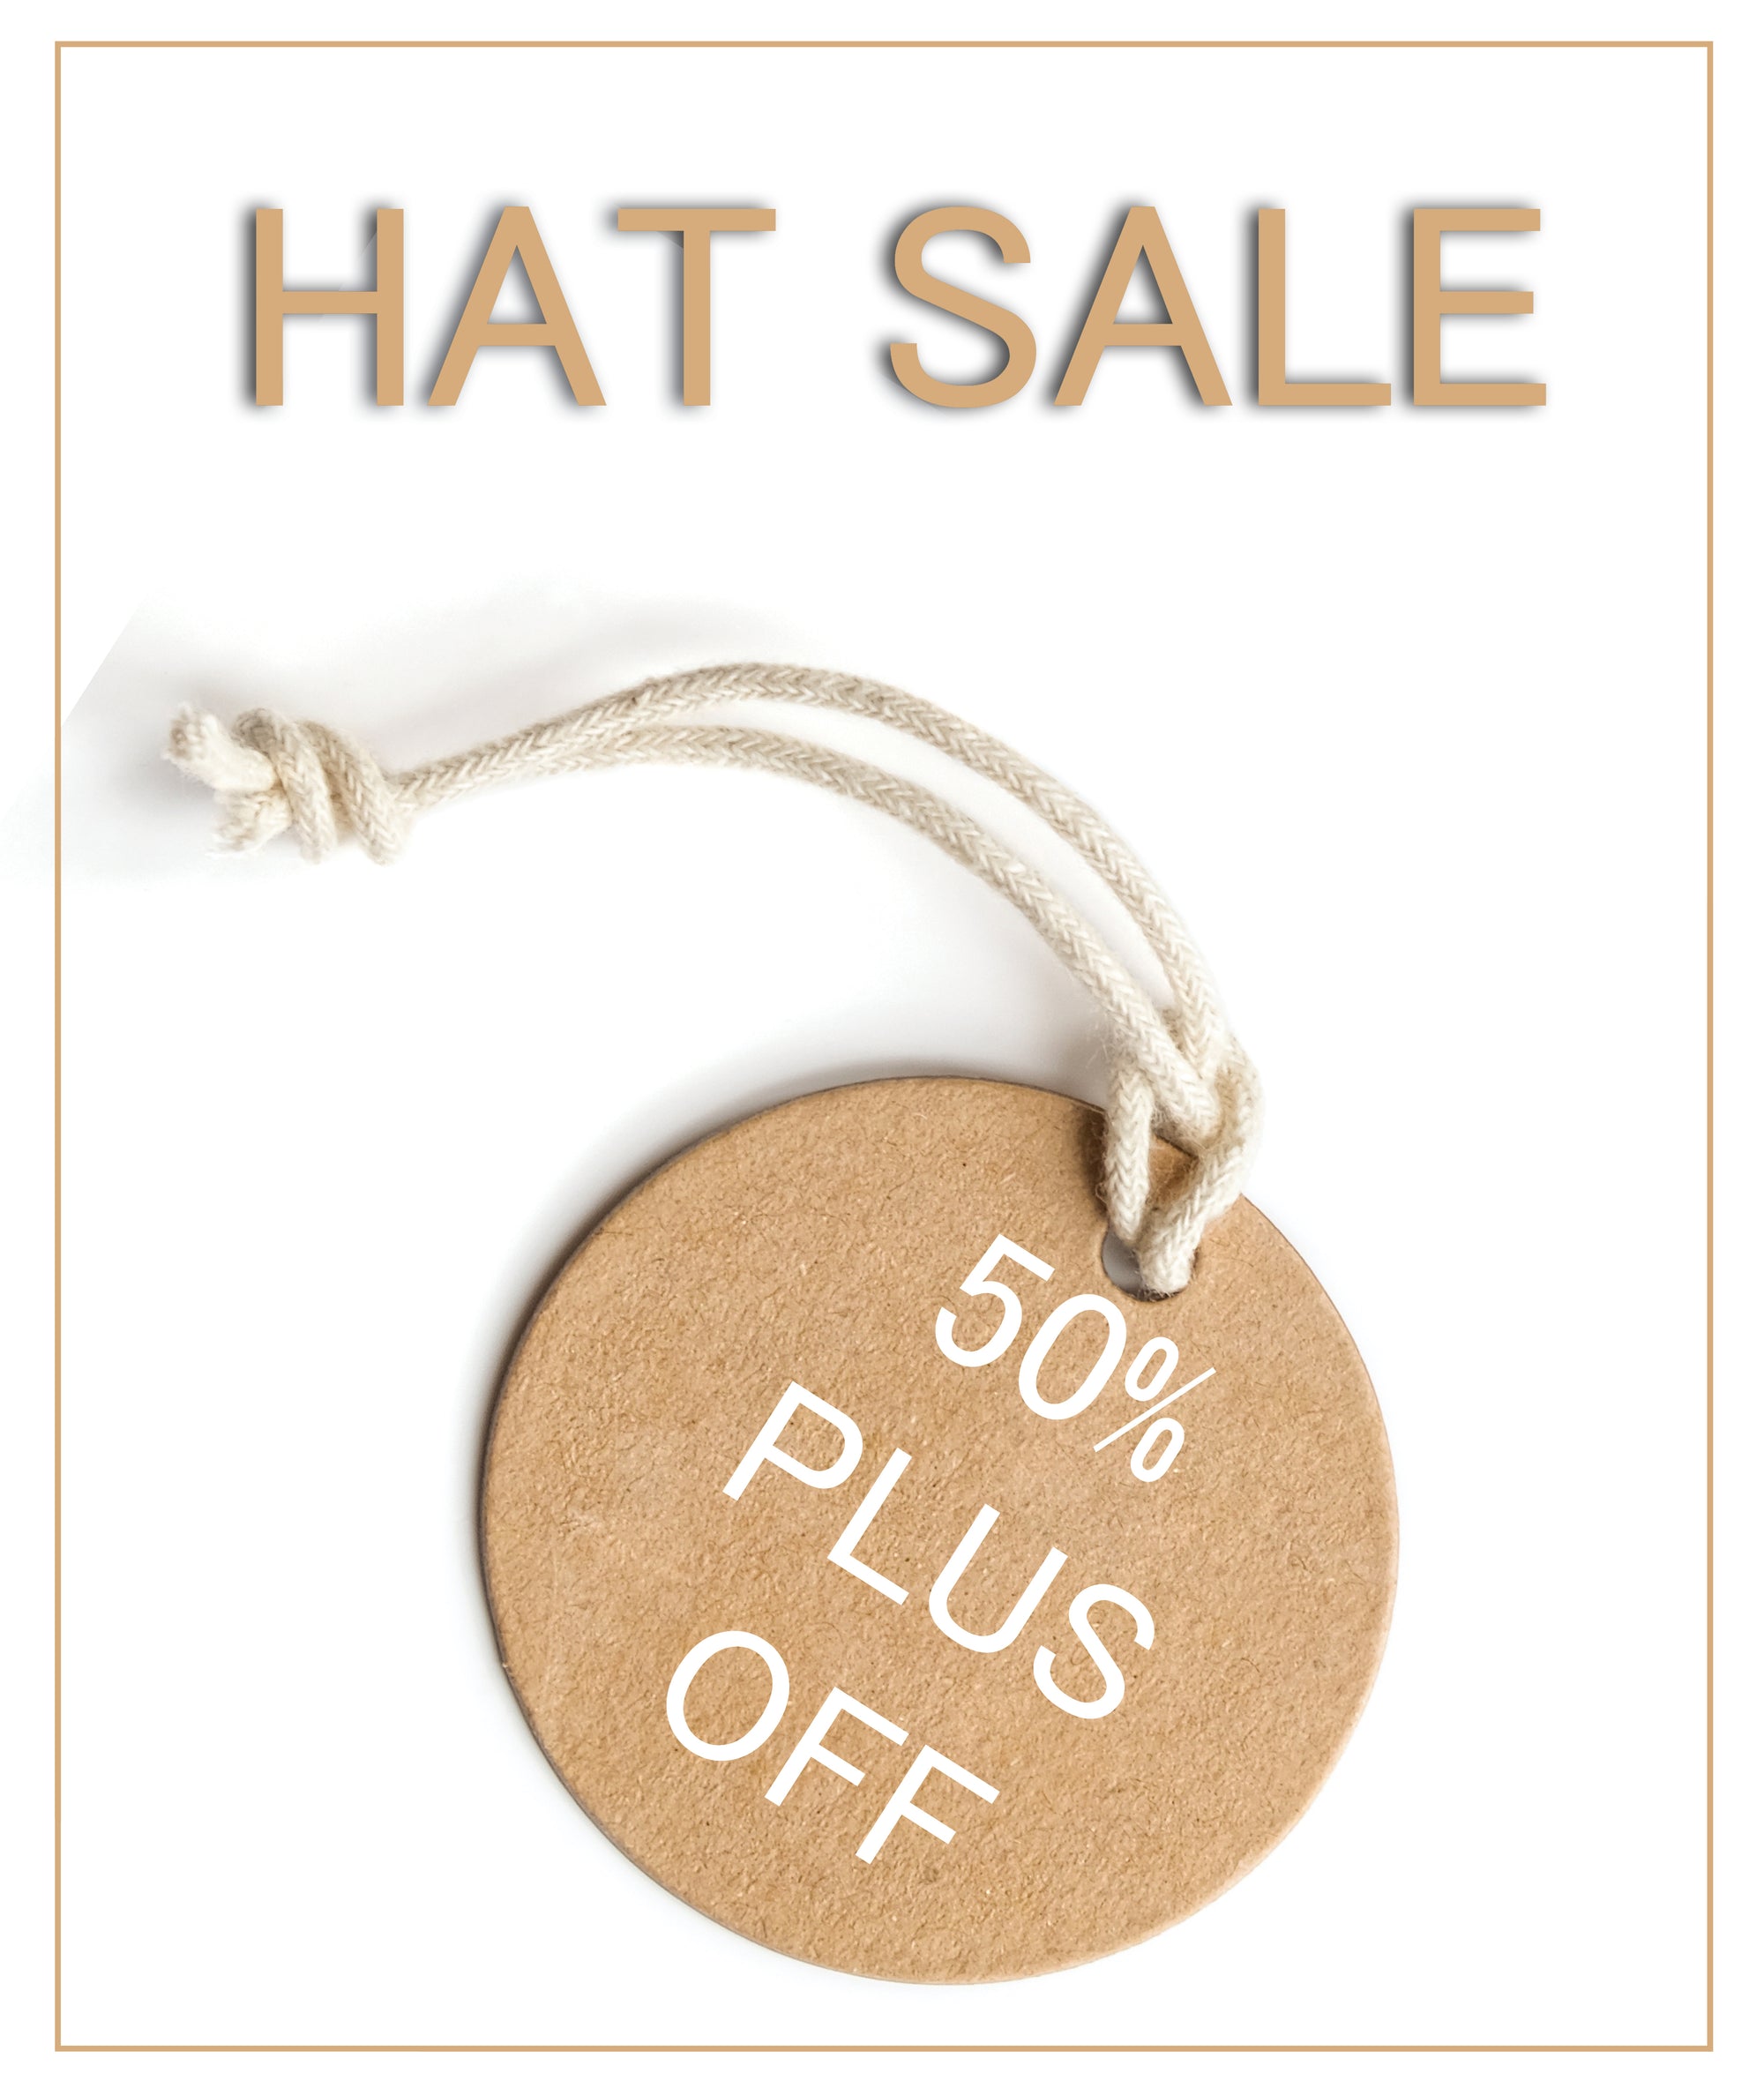 Puffin Gear Hat SALE-UPF50 sun protection hats, polartec hats, kid hats, infant hats, baby bonnet, polartec fleece hat, neck gaiters, snowman hat, faux fur, silver kids jewelry-helmet spikes-flower head bands-first quality made in canada shop now